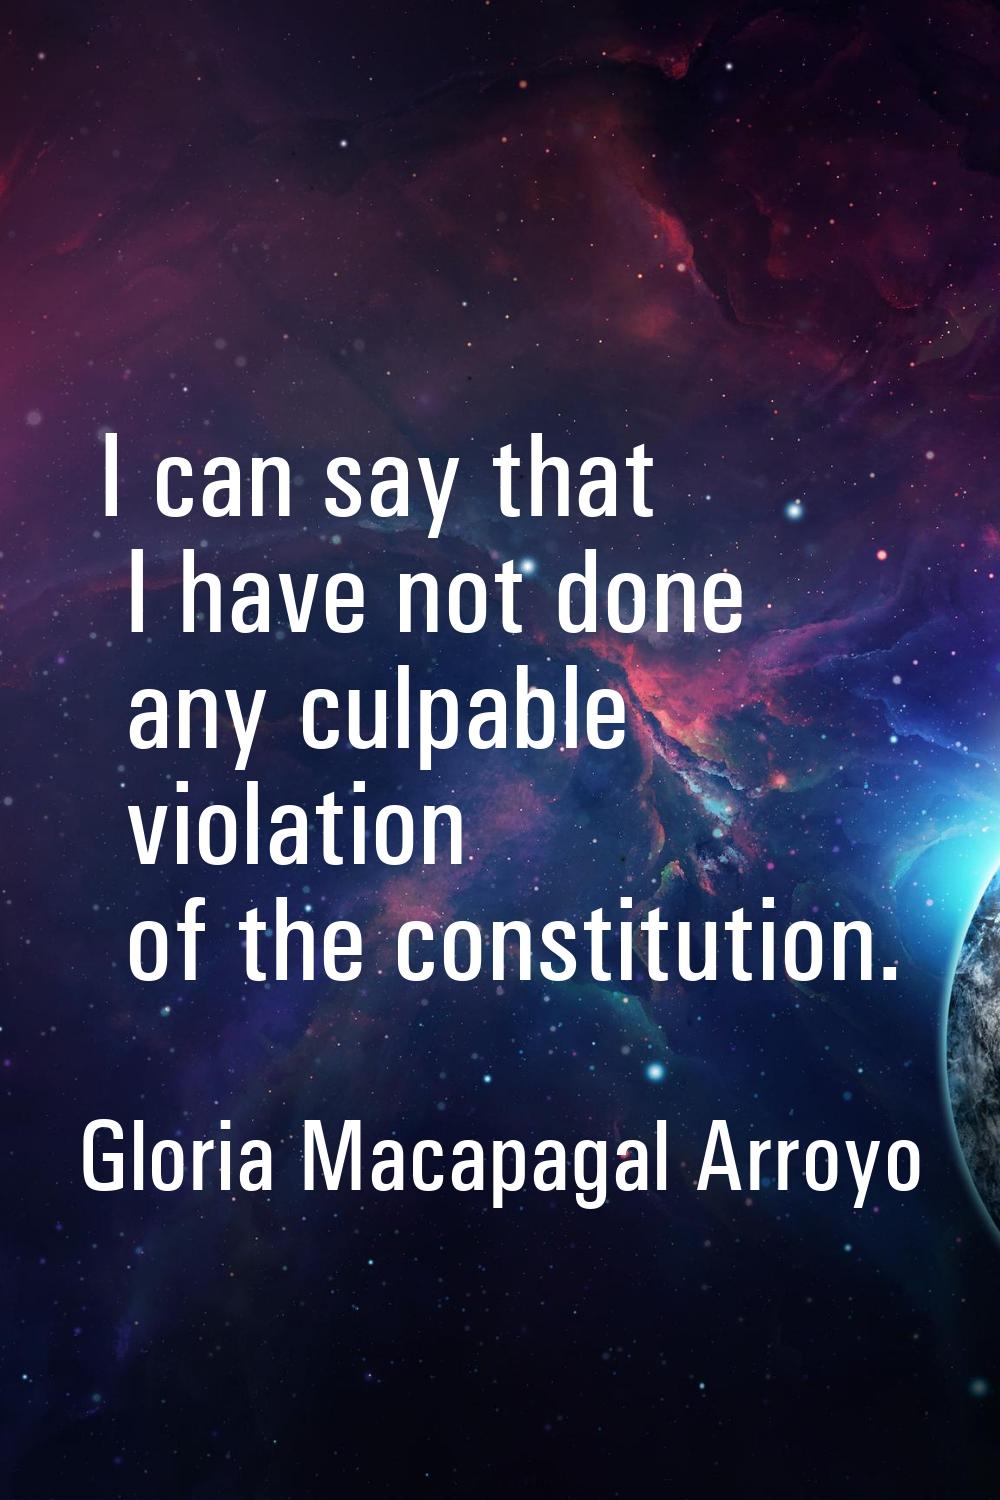 I can say that I have not done any culpable violation of the constitution.